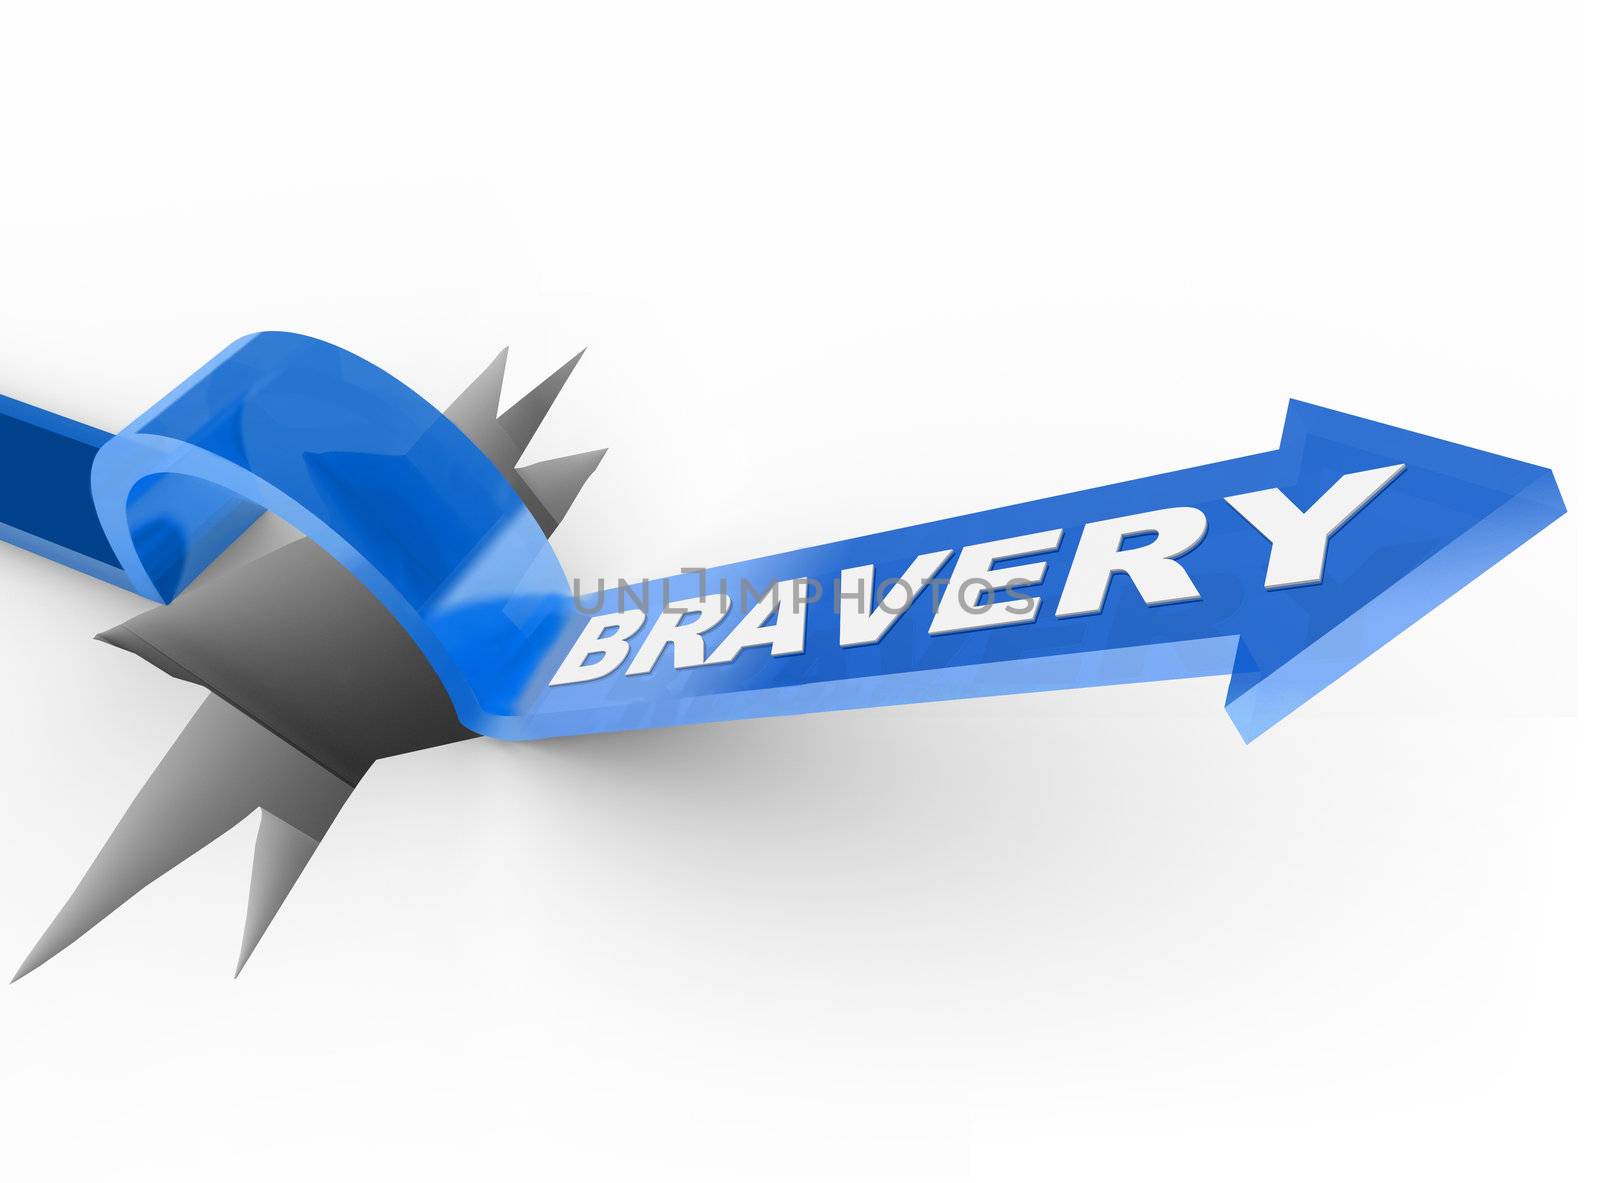 The word Bravery on a blue arrow jumping over a hole symbolizing the survival instinct and being brave and courageous to beat and overcome an obstacle